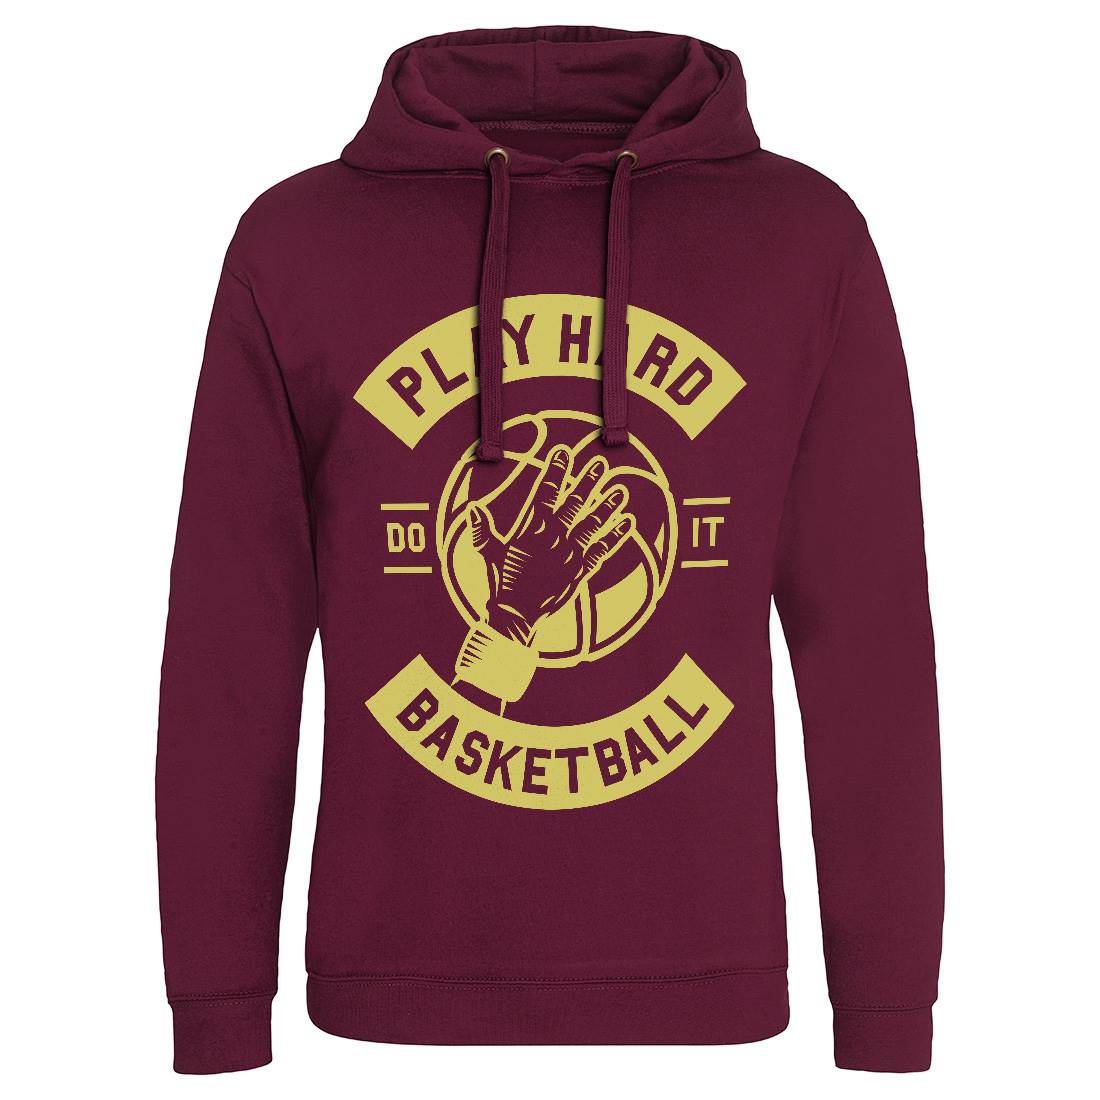 Play Hard Basketball Mens Hoodie Without Pocket Sport A261